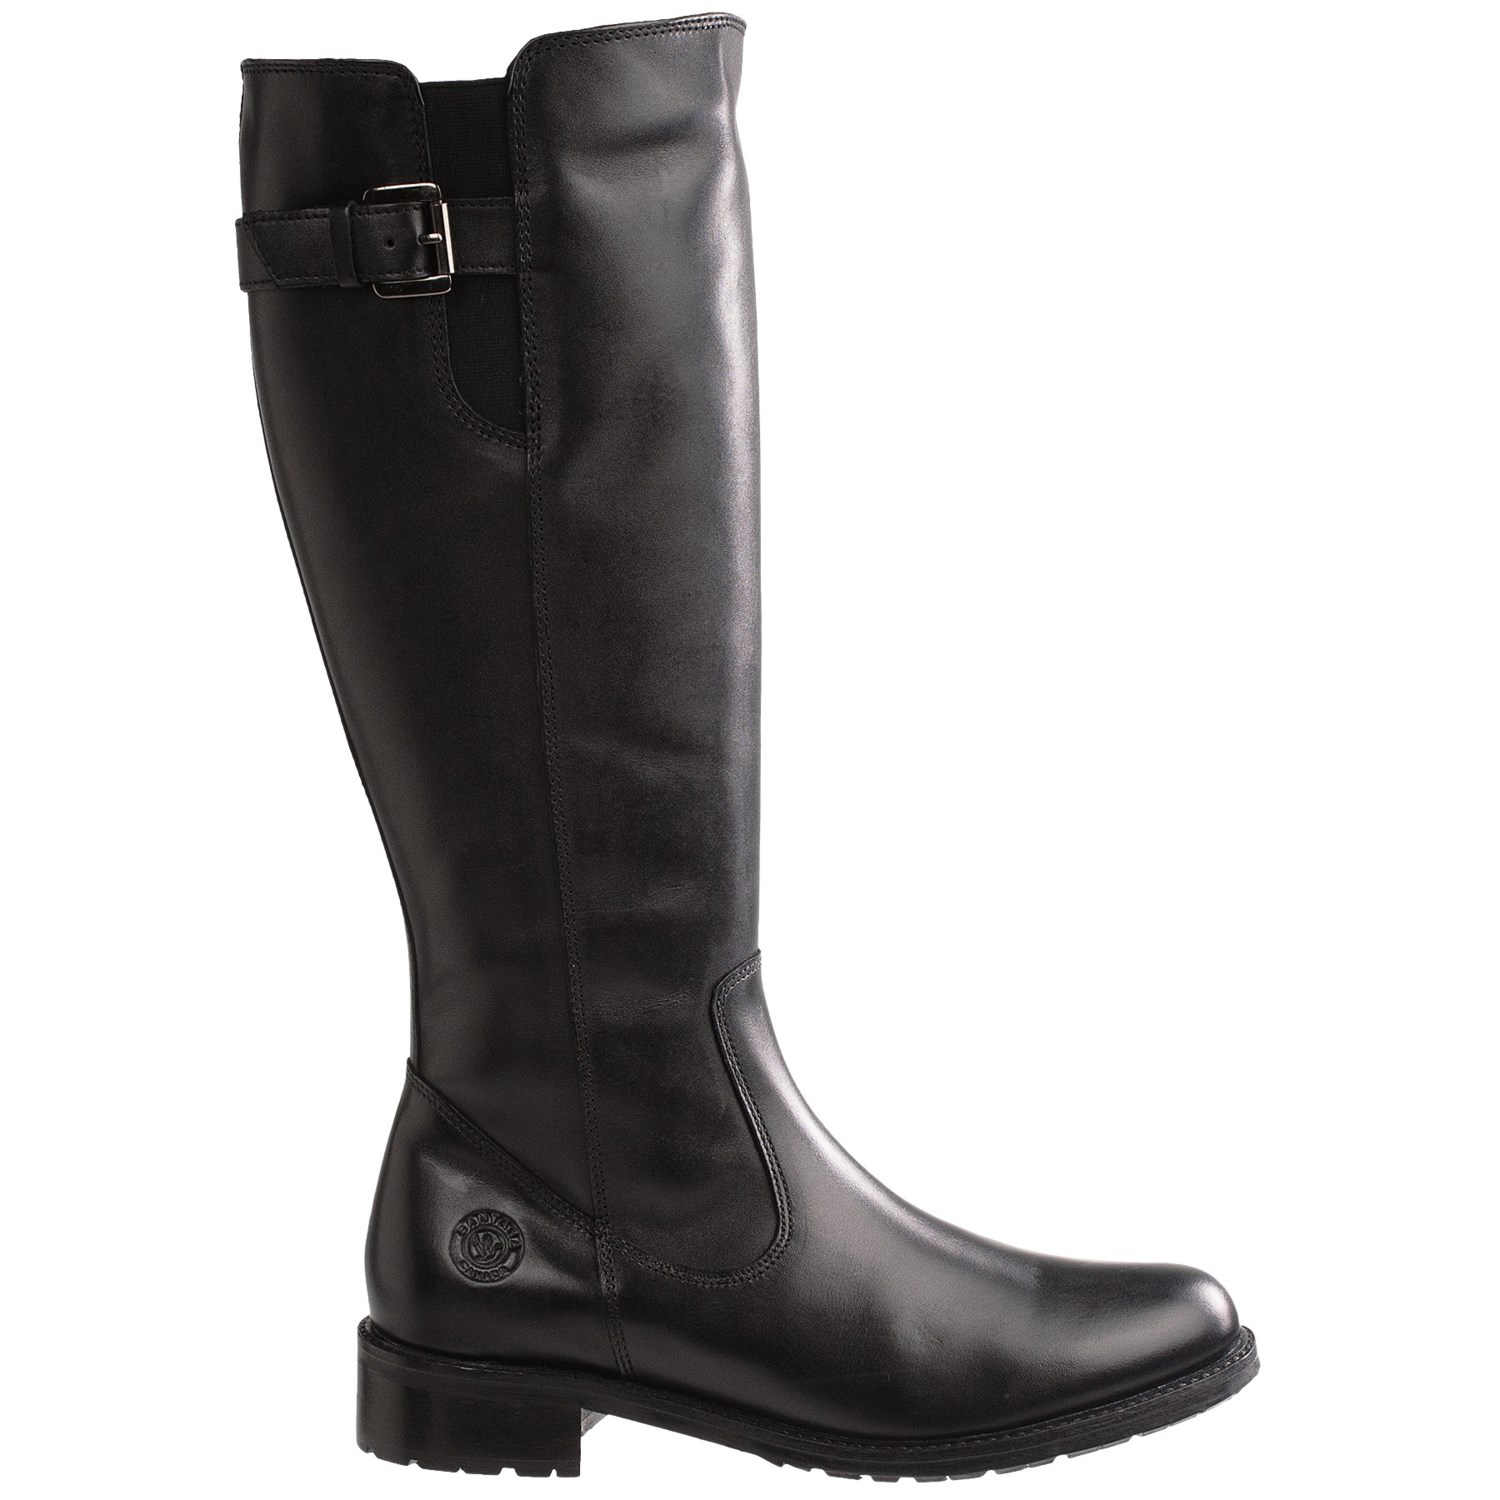 Santana Canada Palomino Leather Boots (For Women) - Save 81%